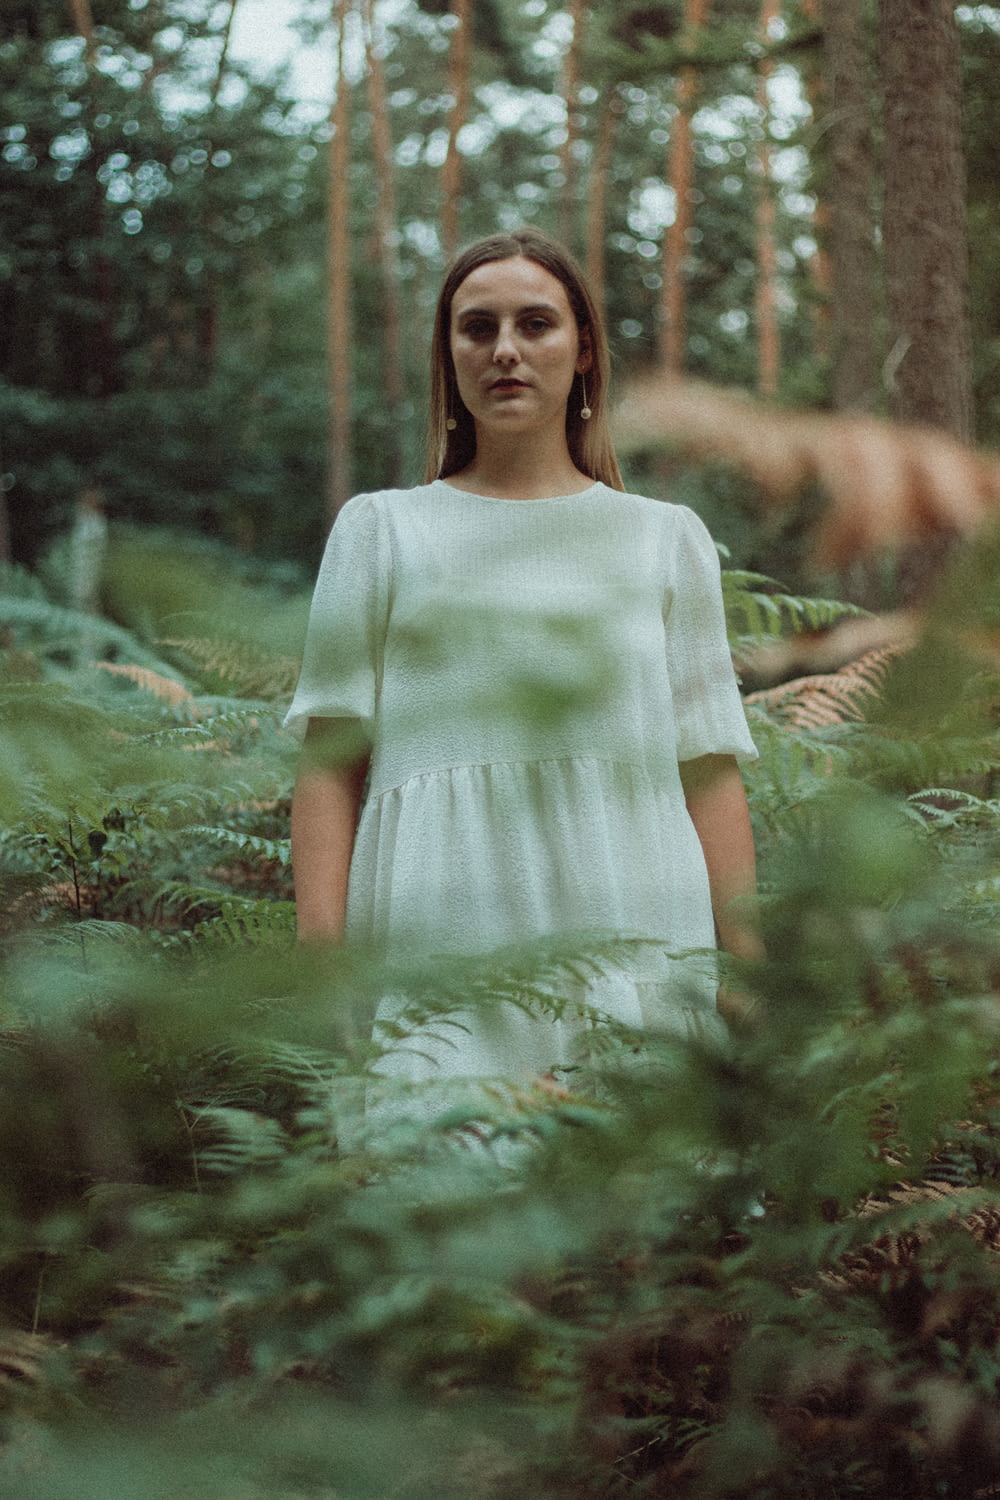 woman in white dress standing in the woods